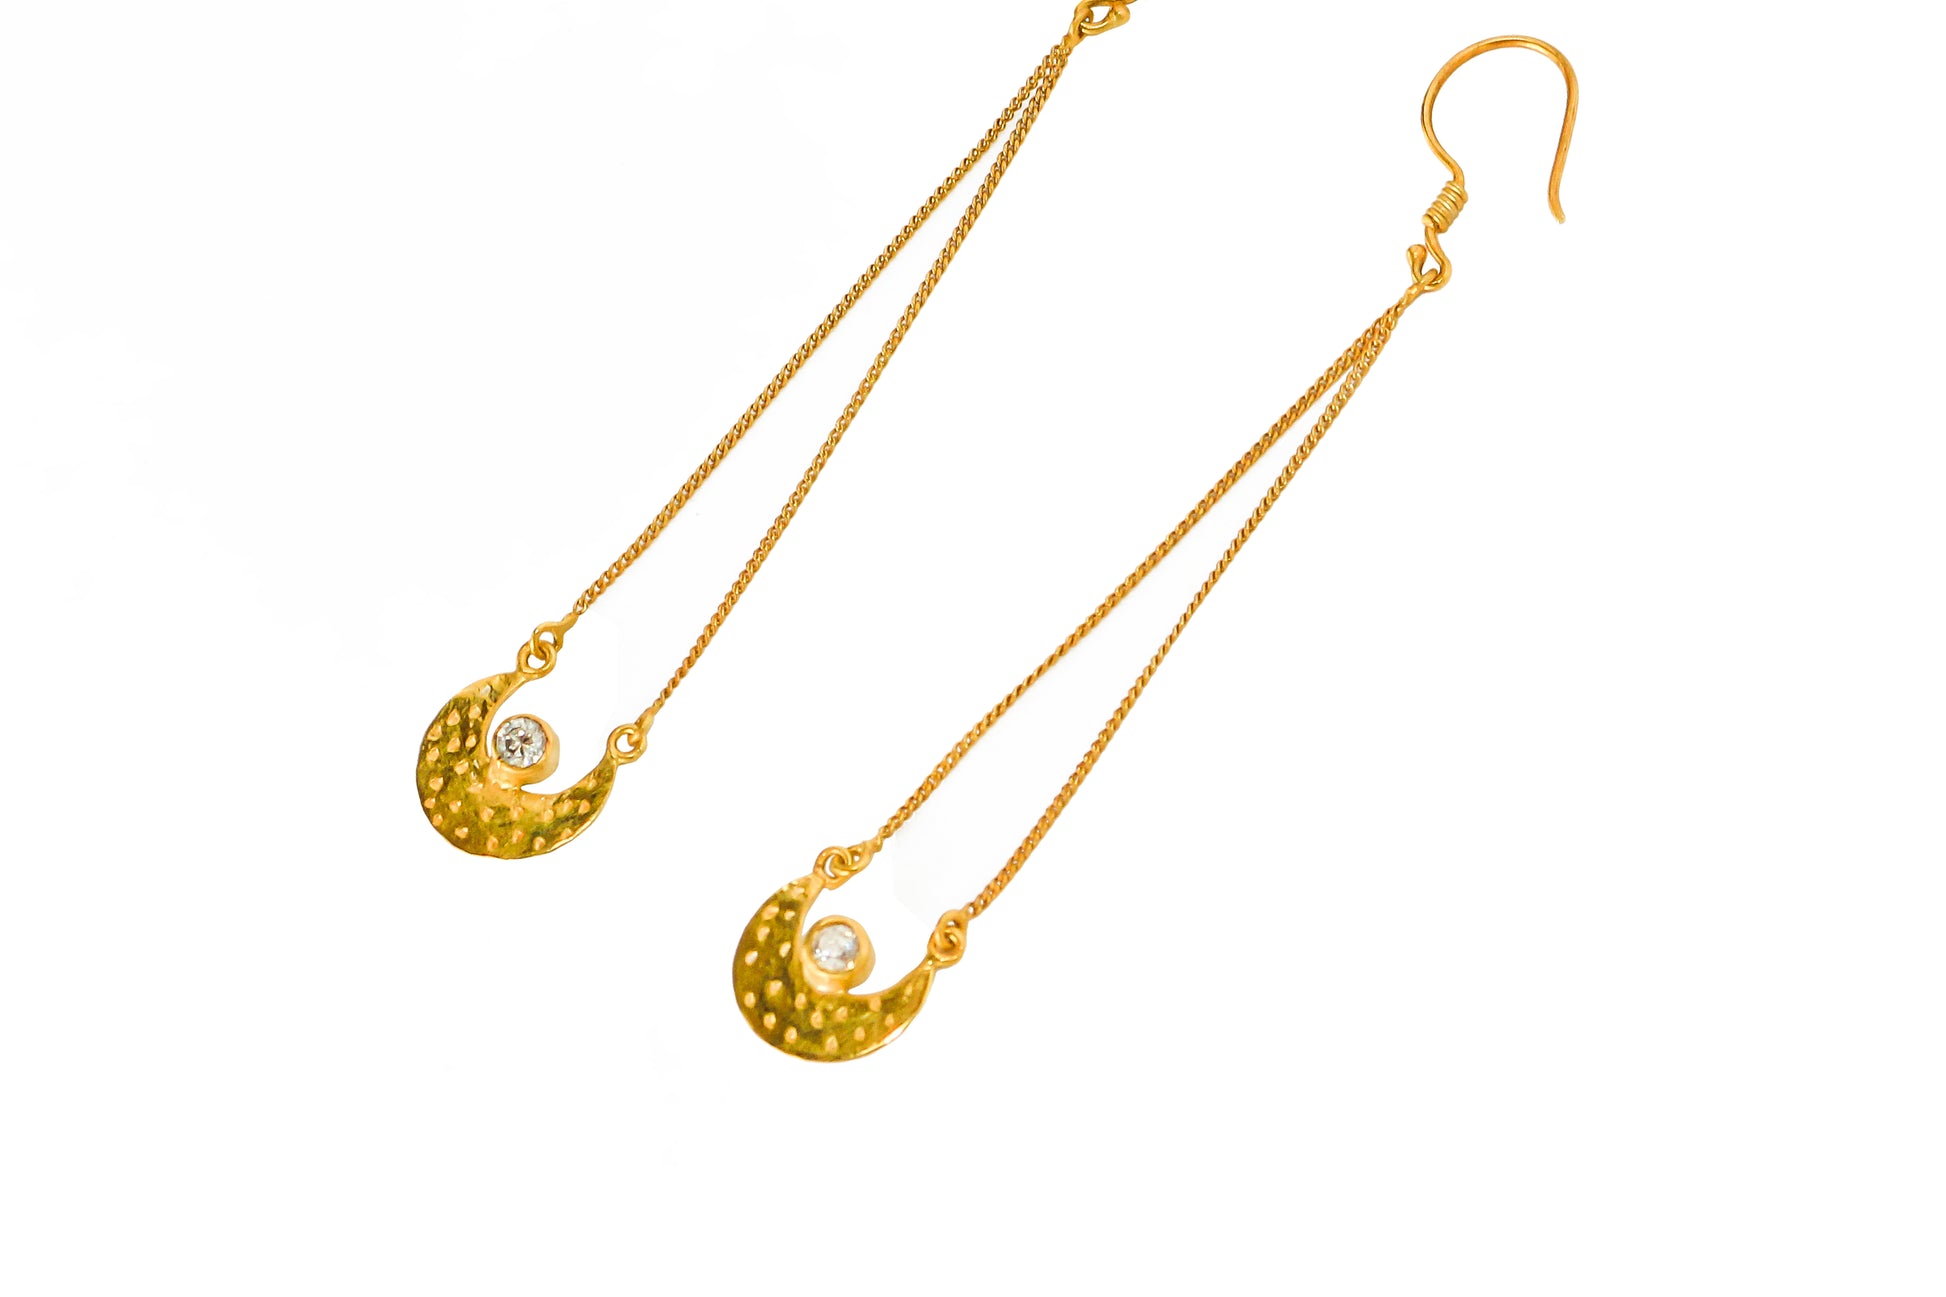 gold moon long earrings close up details